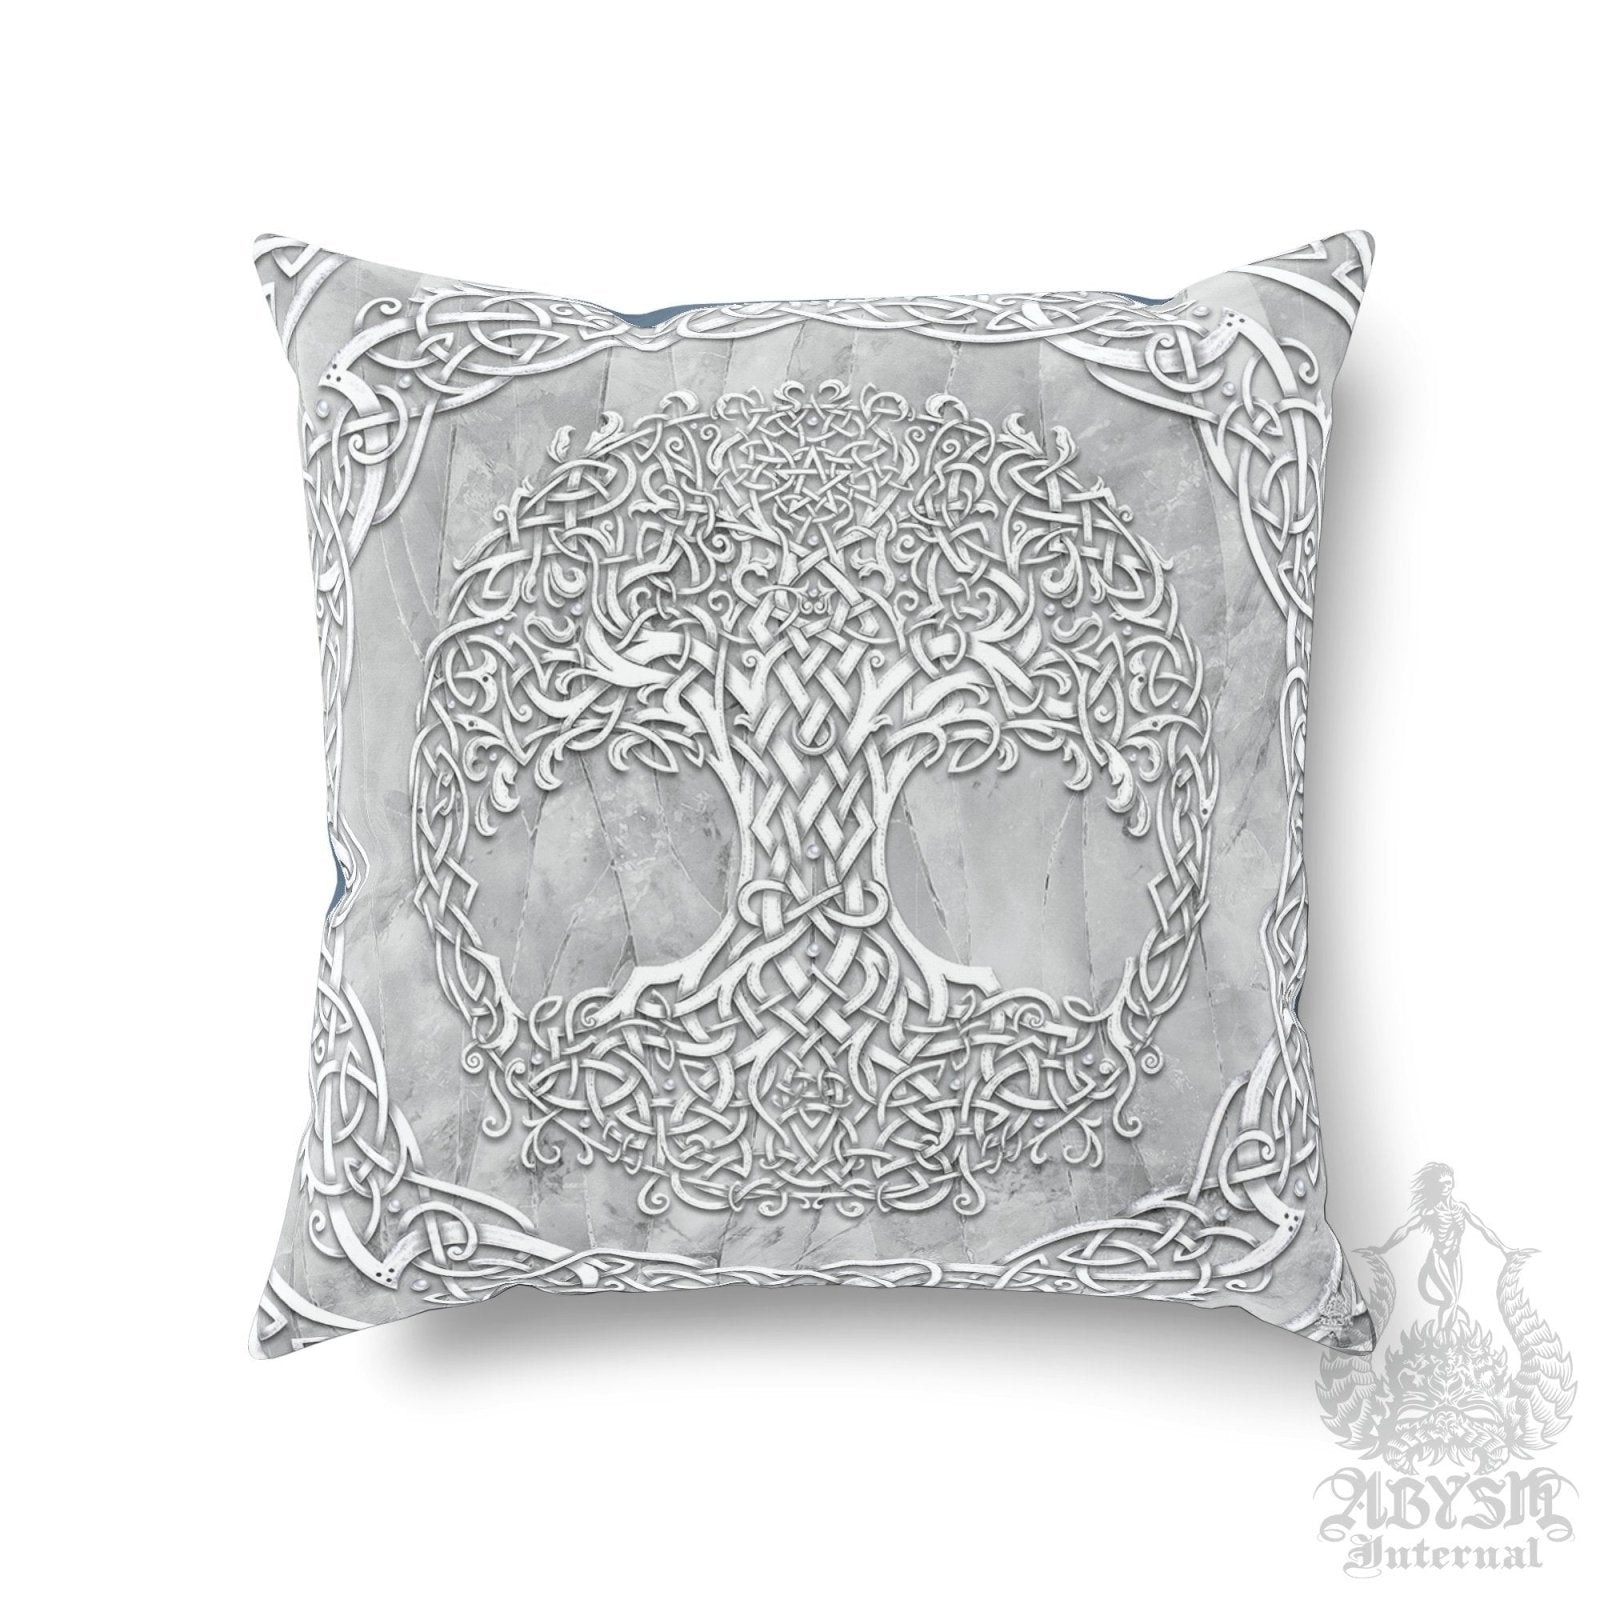 Celtic Throw Pillow, Decorative Accent Cushion, Tree of Life, Pagan Room Decor, Witchy Art, Funky and Eclectic Home - Stone - Abysm Internal